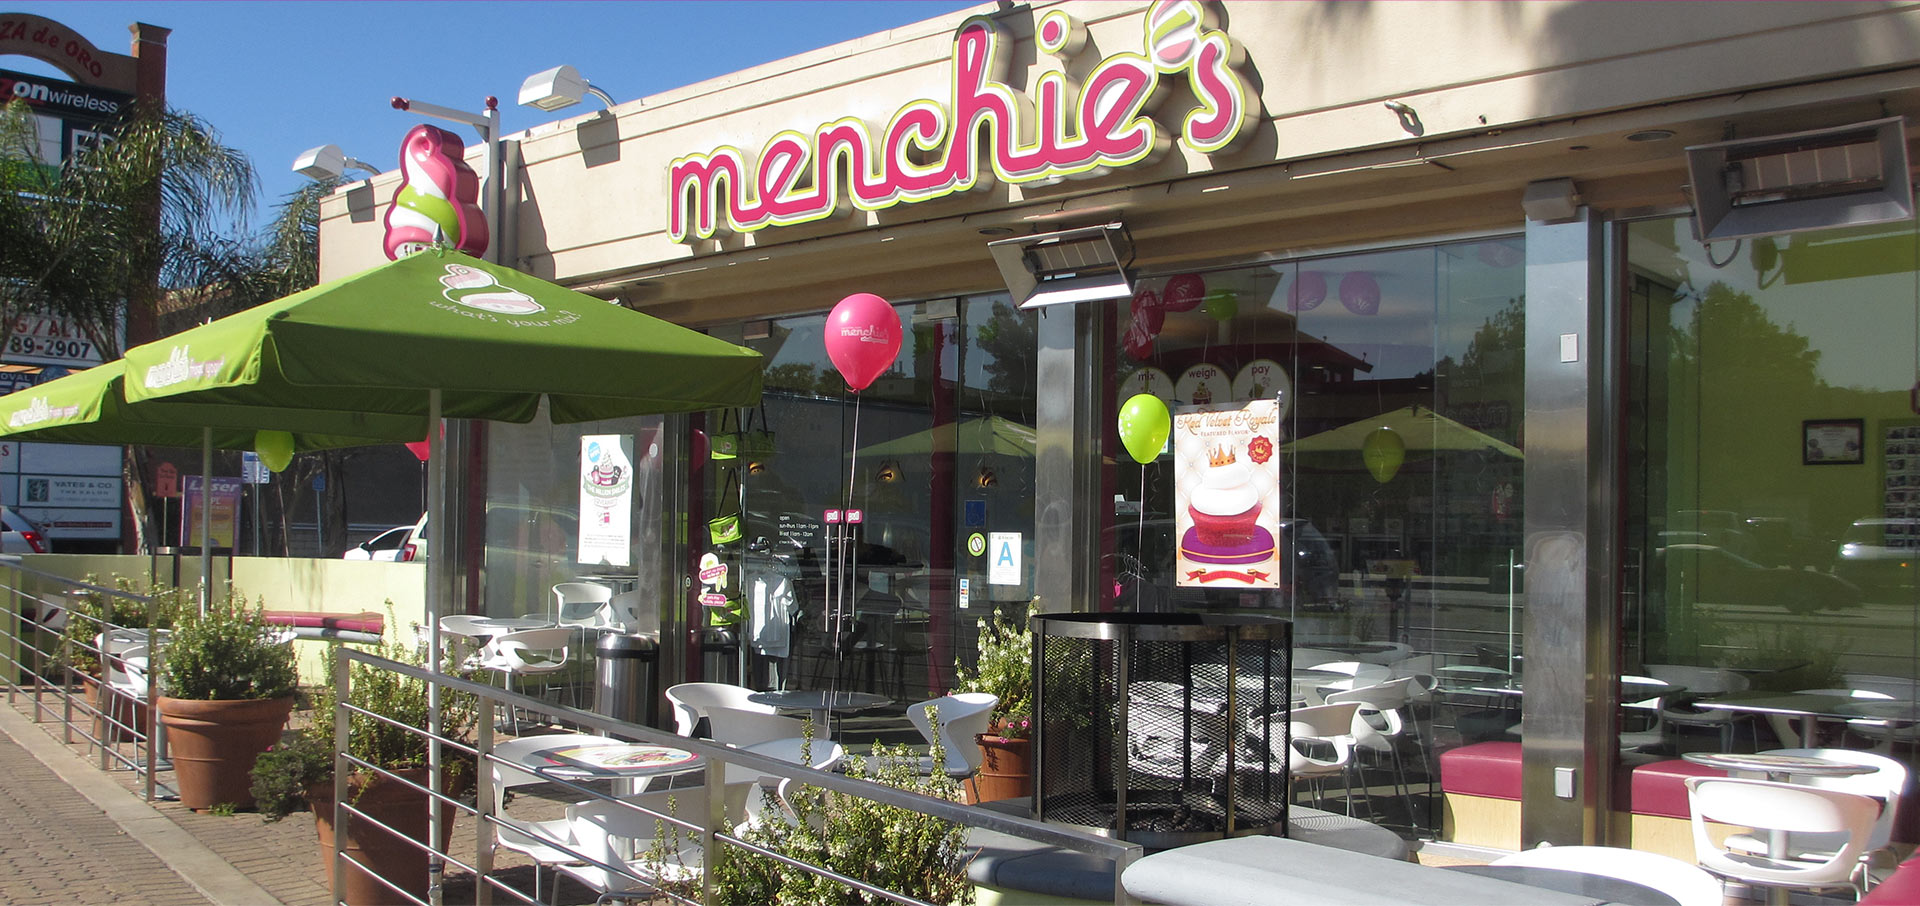 A Menchie's storefront